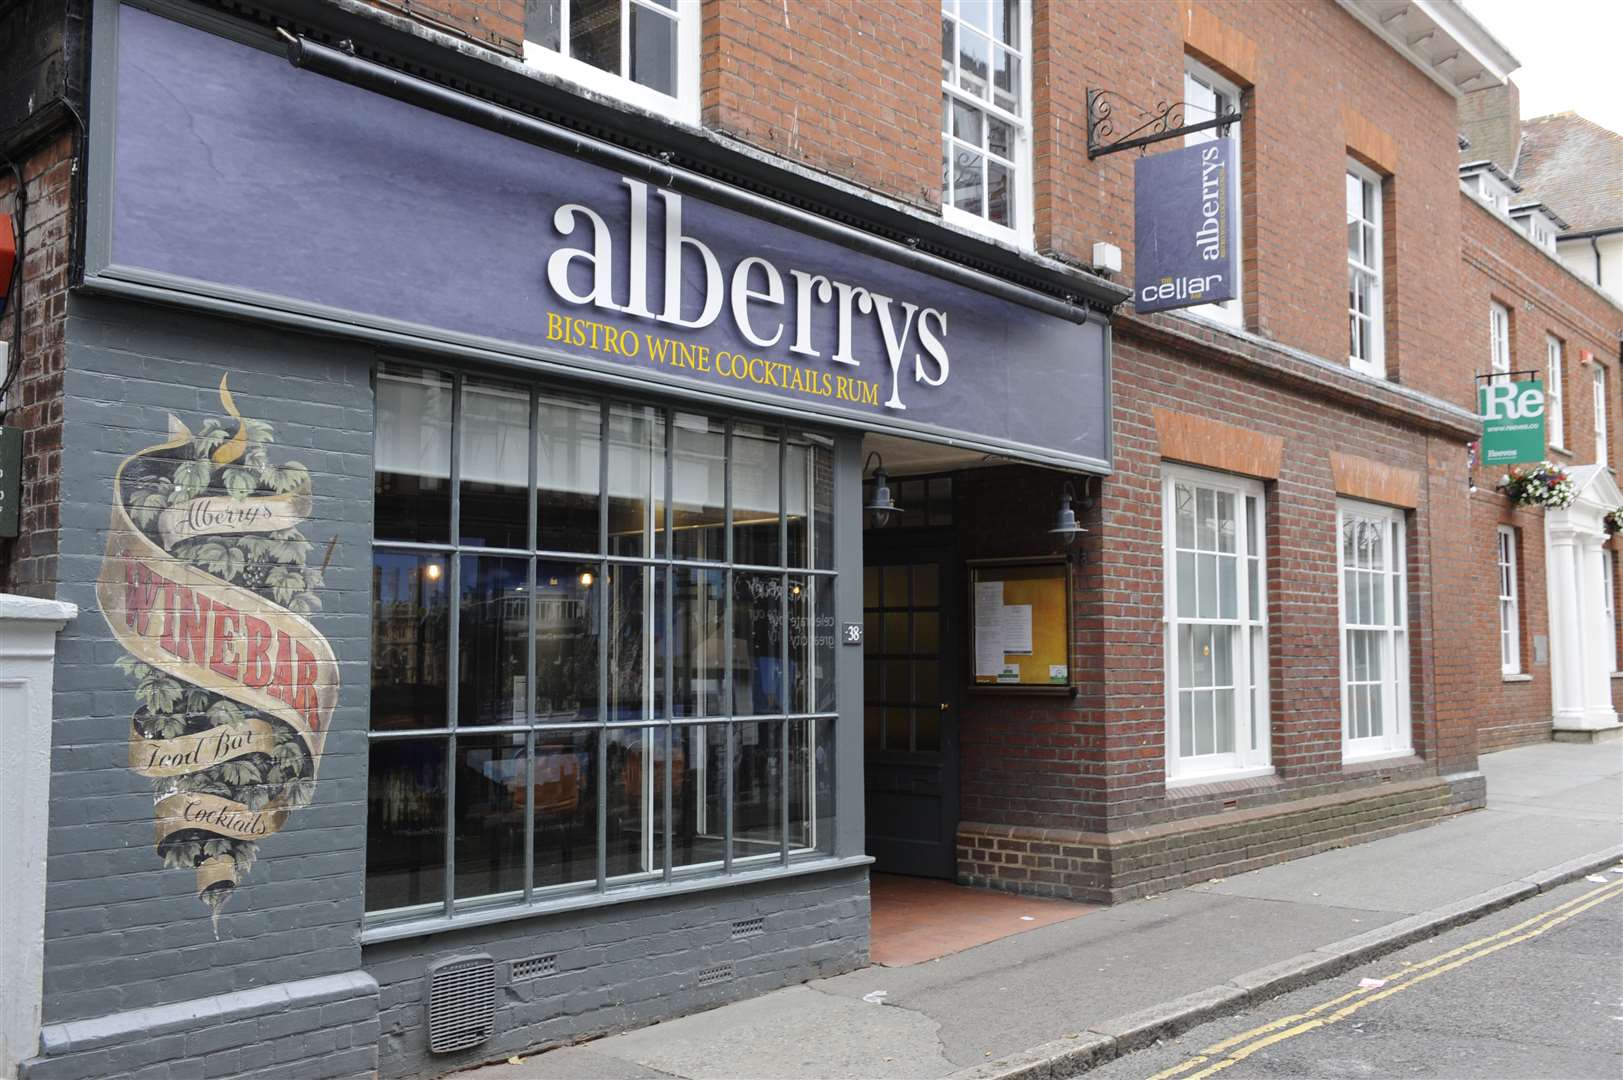 Barry Danes turned violent at Alberrys in St Margaret's Street, Canterbury